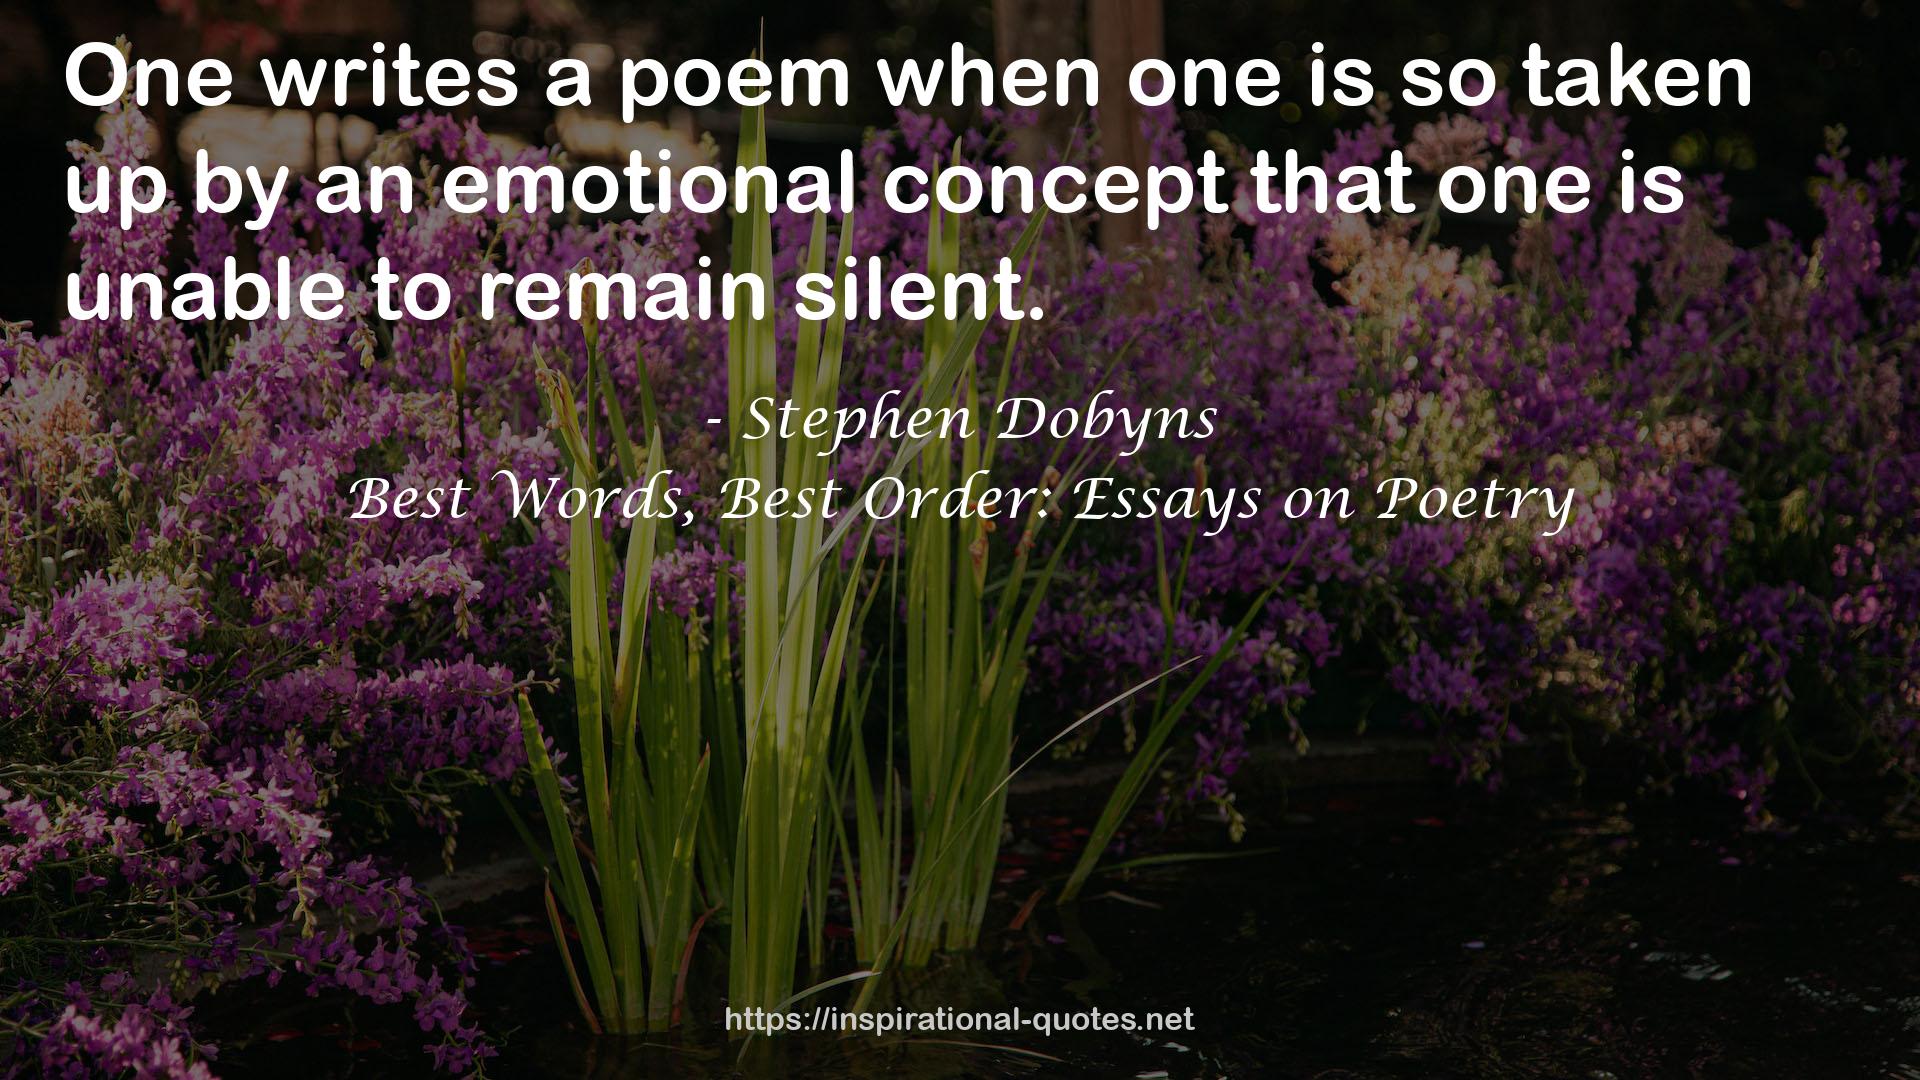 Best Words, Best Order: Essays on Poetry QUOTES